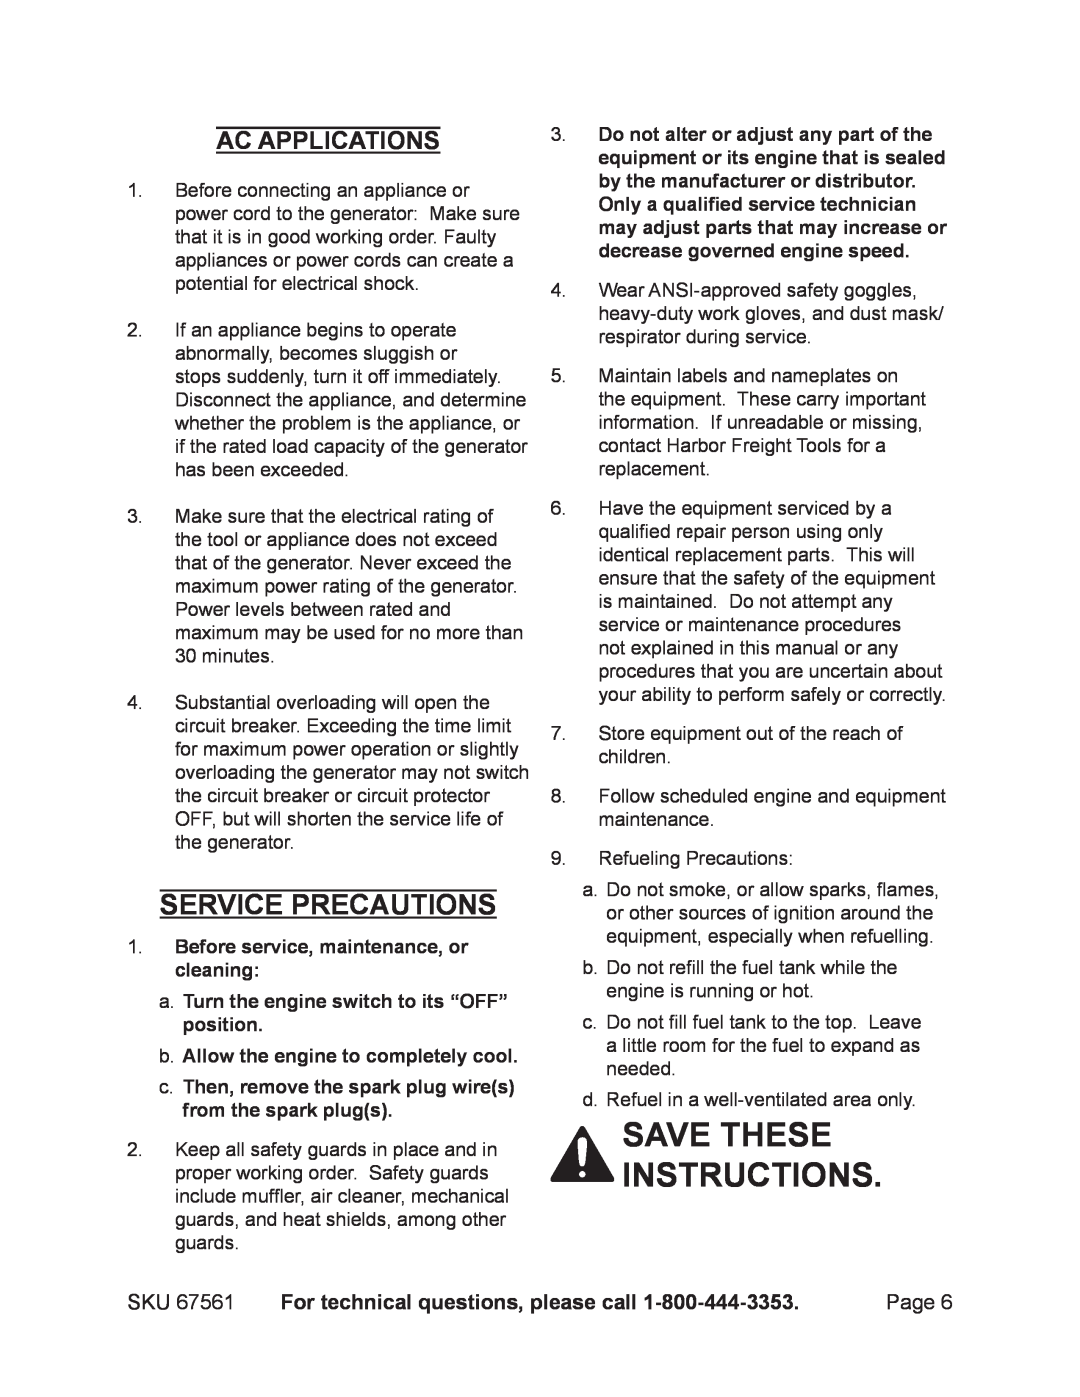 Chicago Electric 67561 manual Save these instructions, Service precautions, For technical questions, please call 